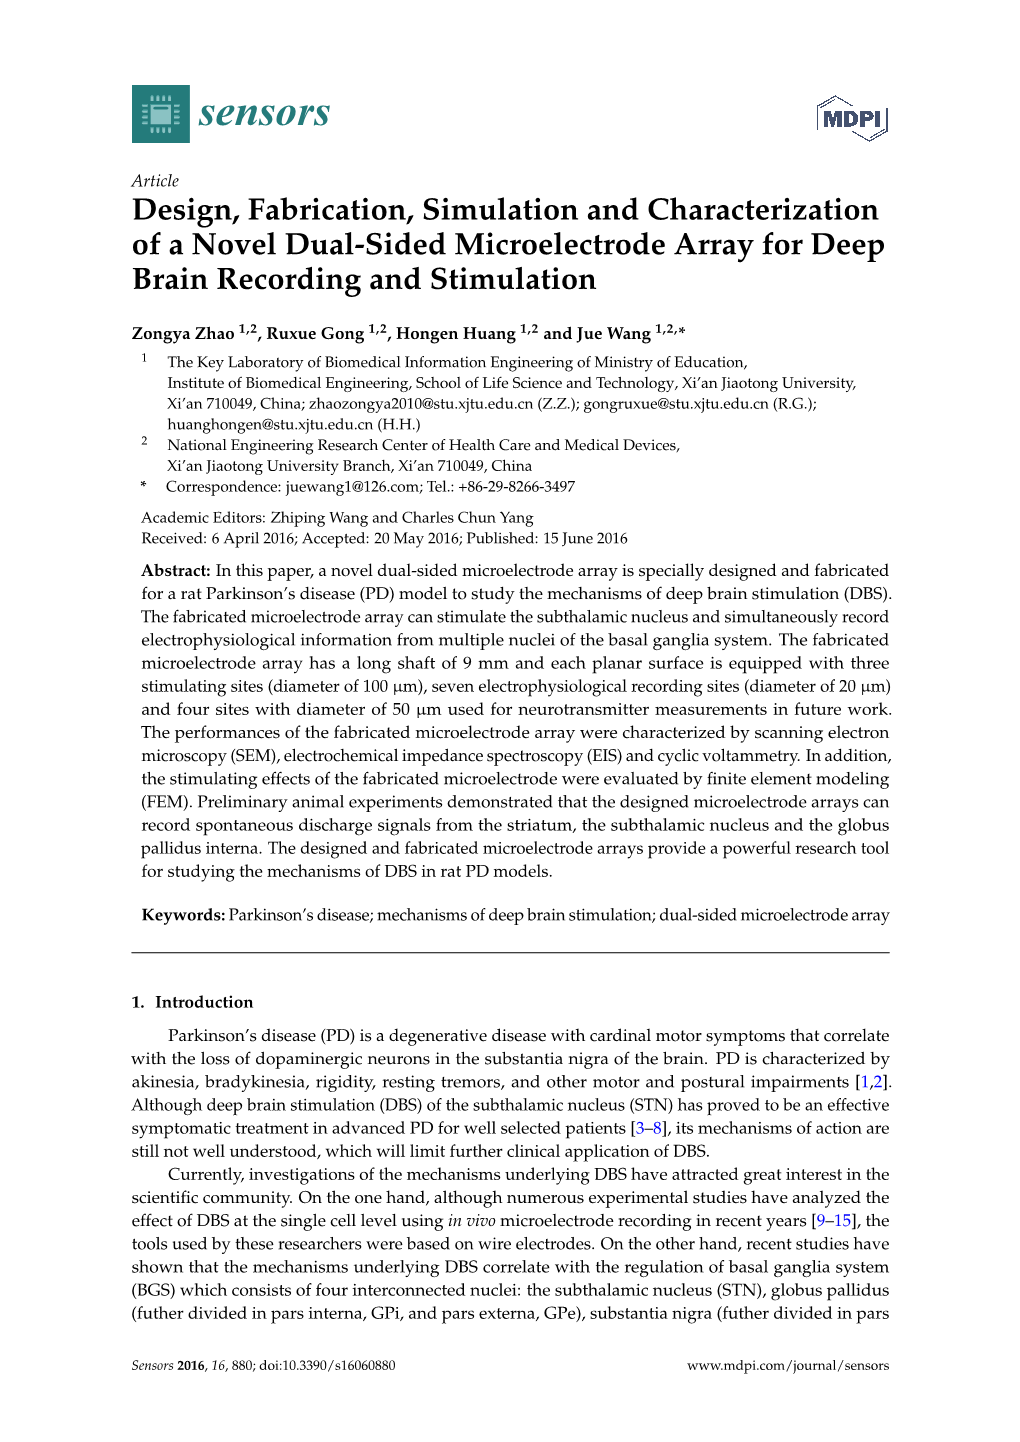 Design, Fabrication, Simulation and Characterization of a Novel Dual-Sided Microelectrode Array for Deep Brain Recording and Stimulation